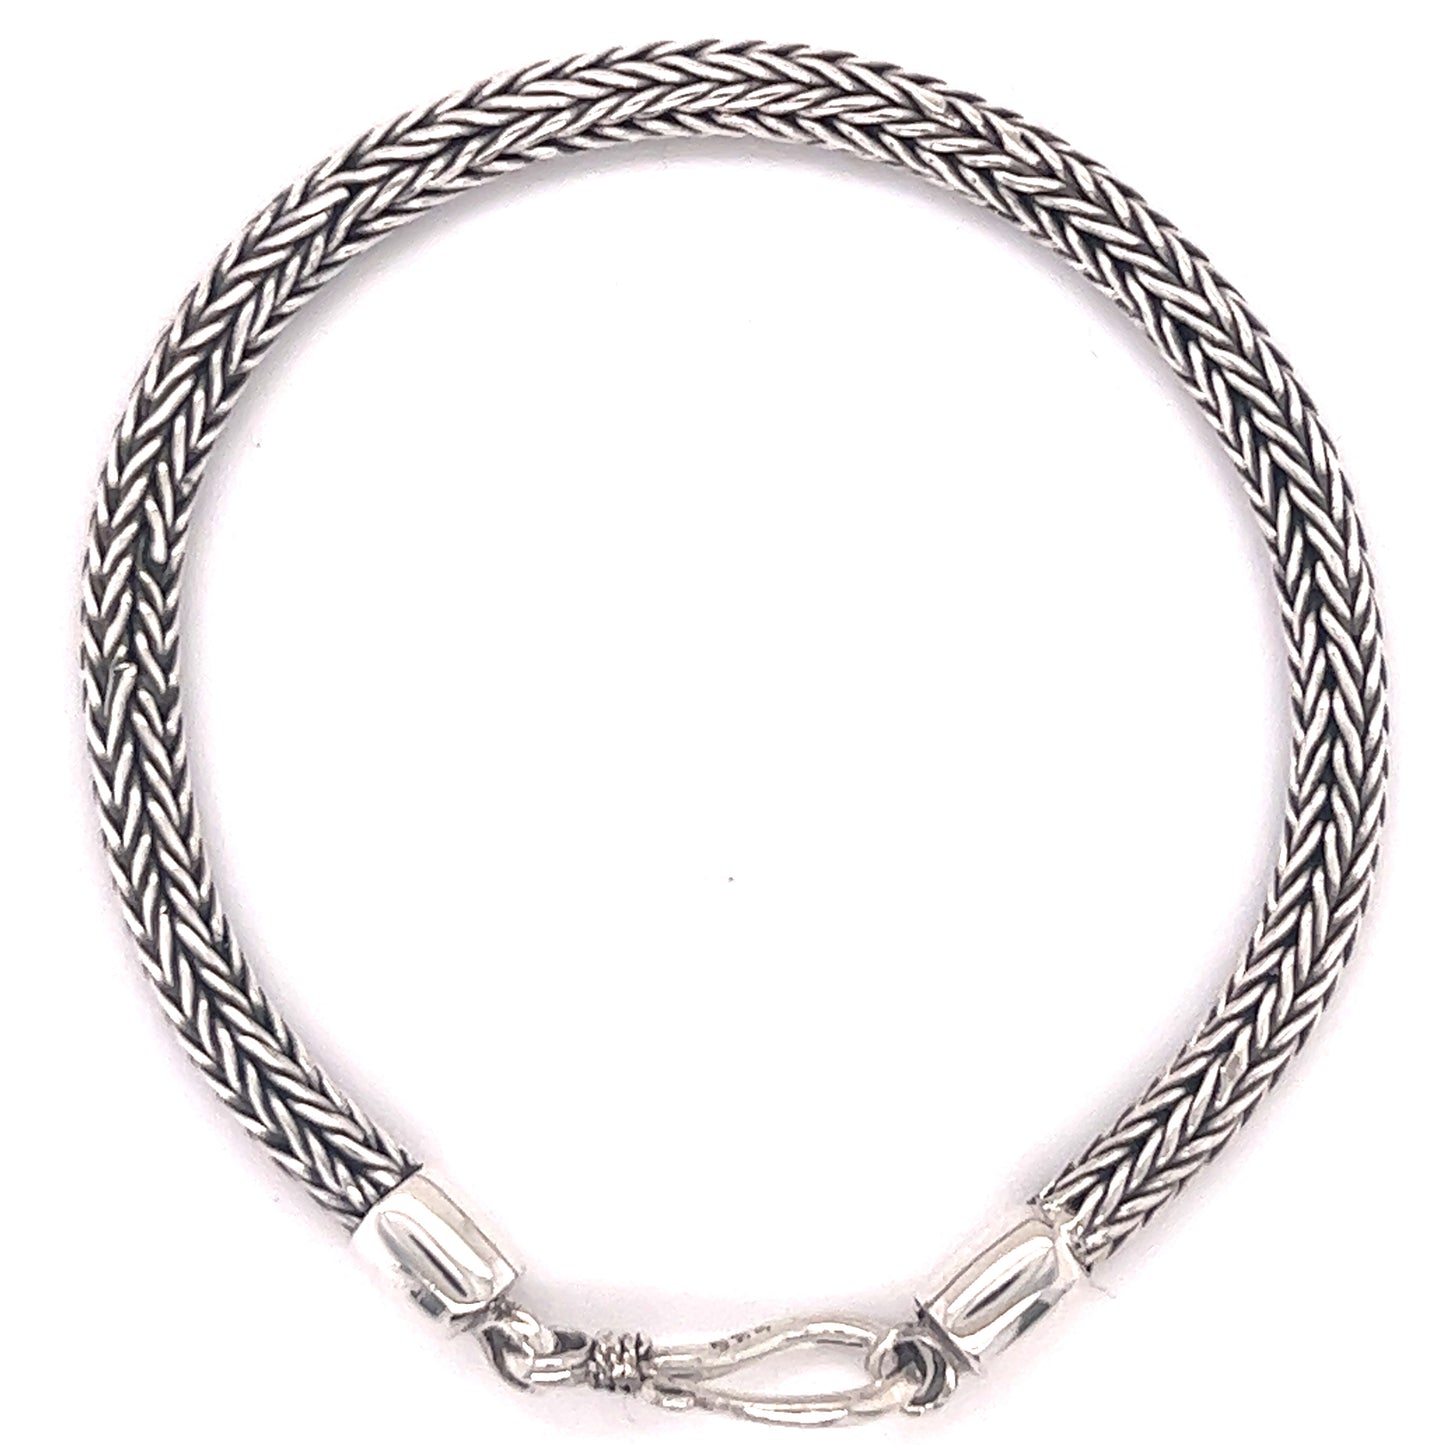 A thicker, Super Silver braided rope bracelet with a clasp and with a darkened finish.